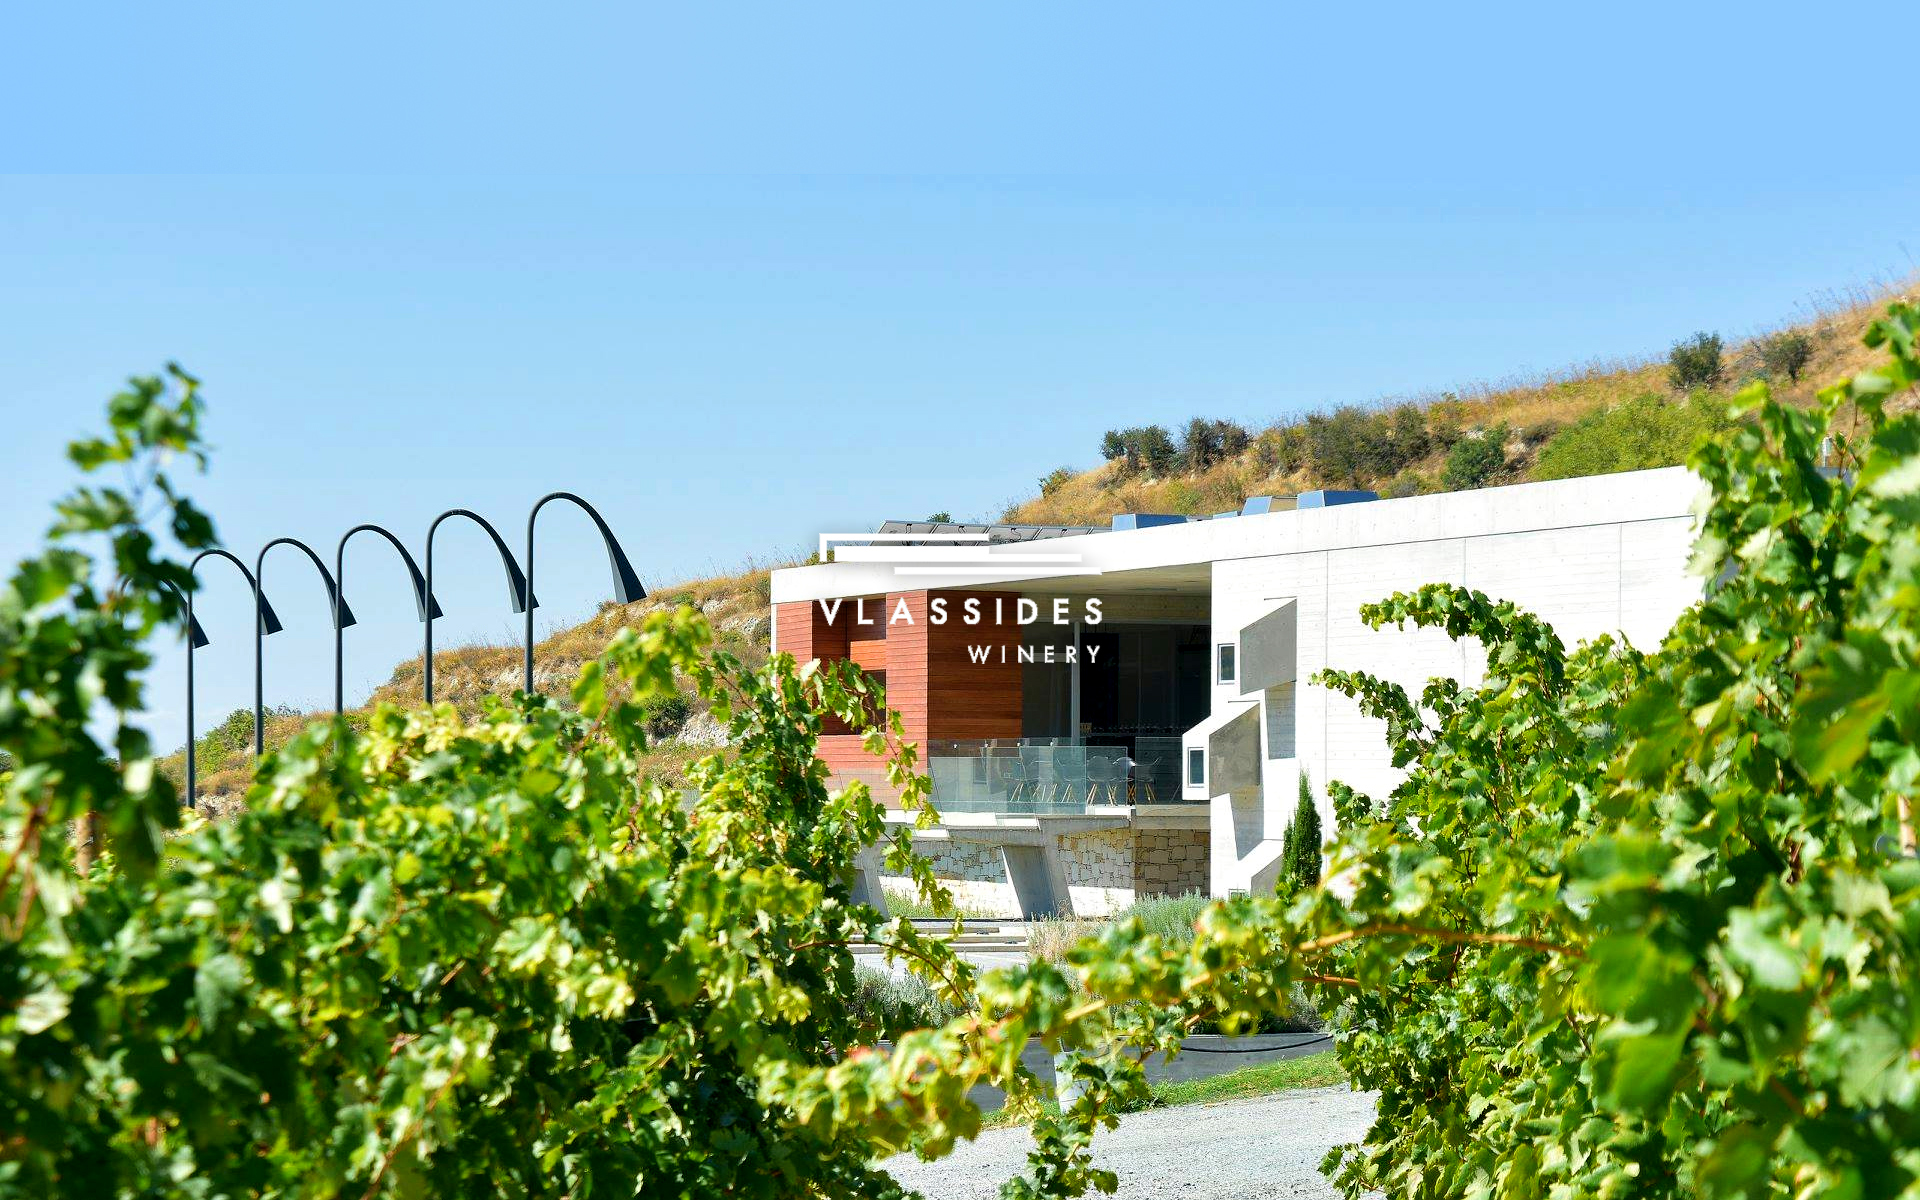 Vlassides Winery in Cyprus